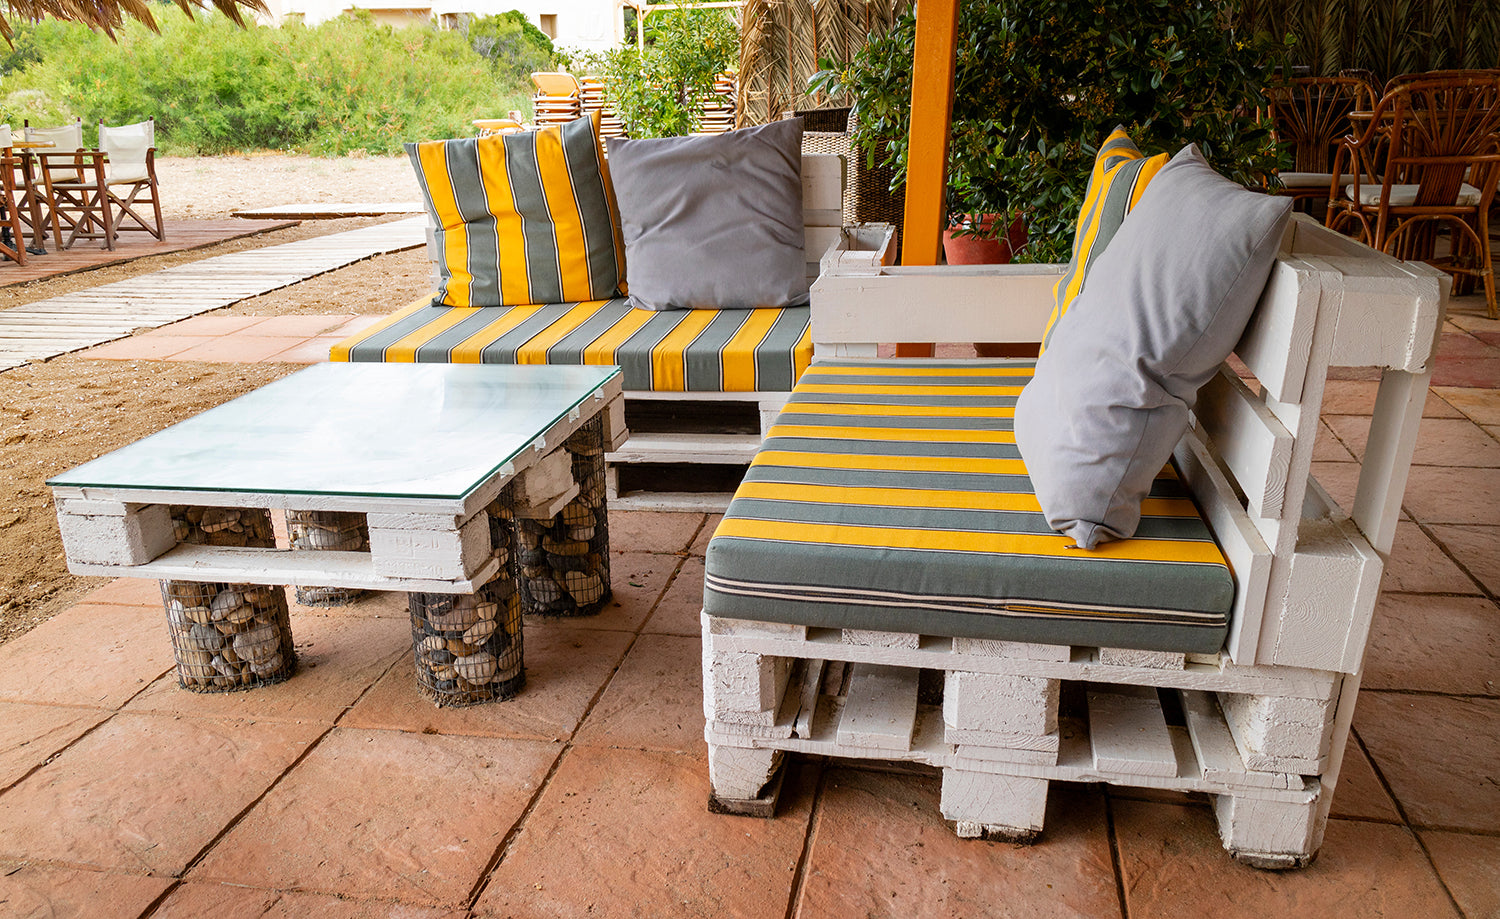 Upcycling - Handmade Pallet Furniture